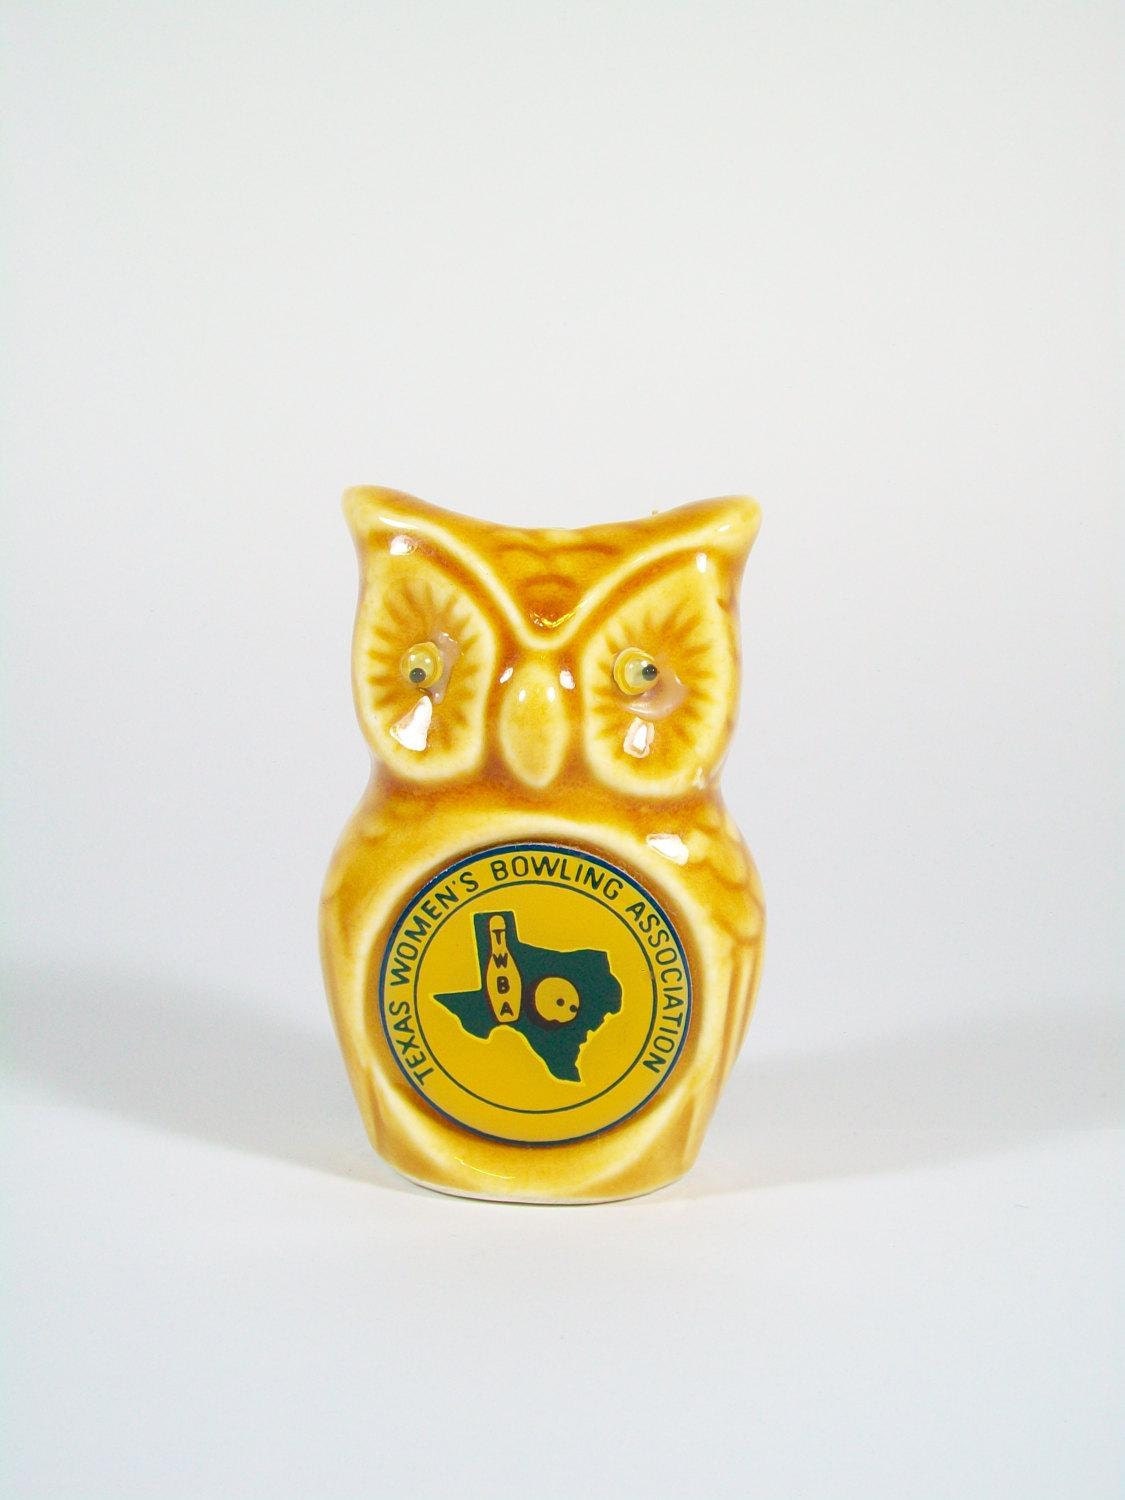 Owl Toothpick Holder Ceramic Owl TEXAS Souvenir Bowling Collectibles Kitsch - A2ndlifeVintage